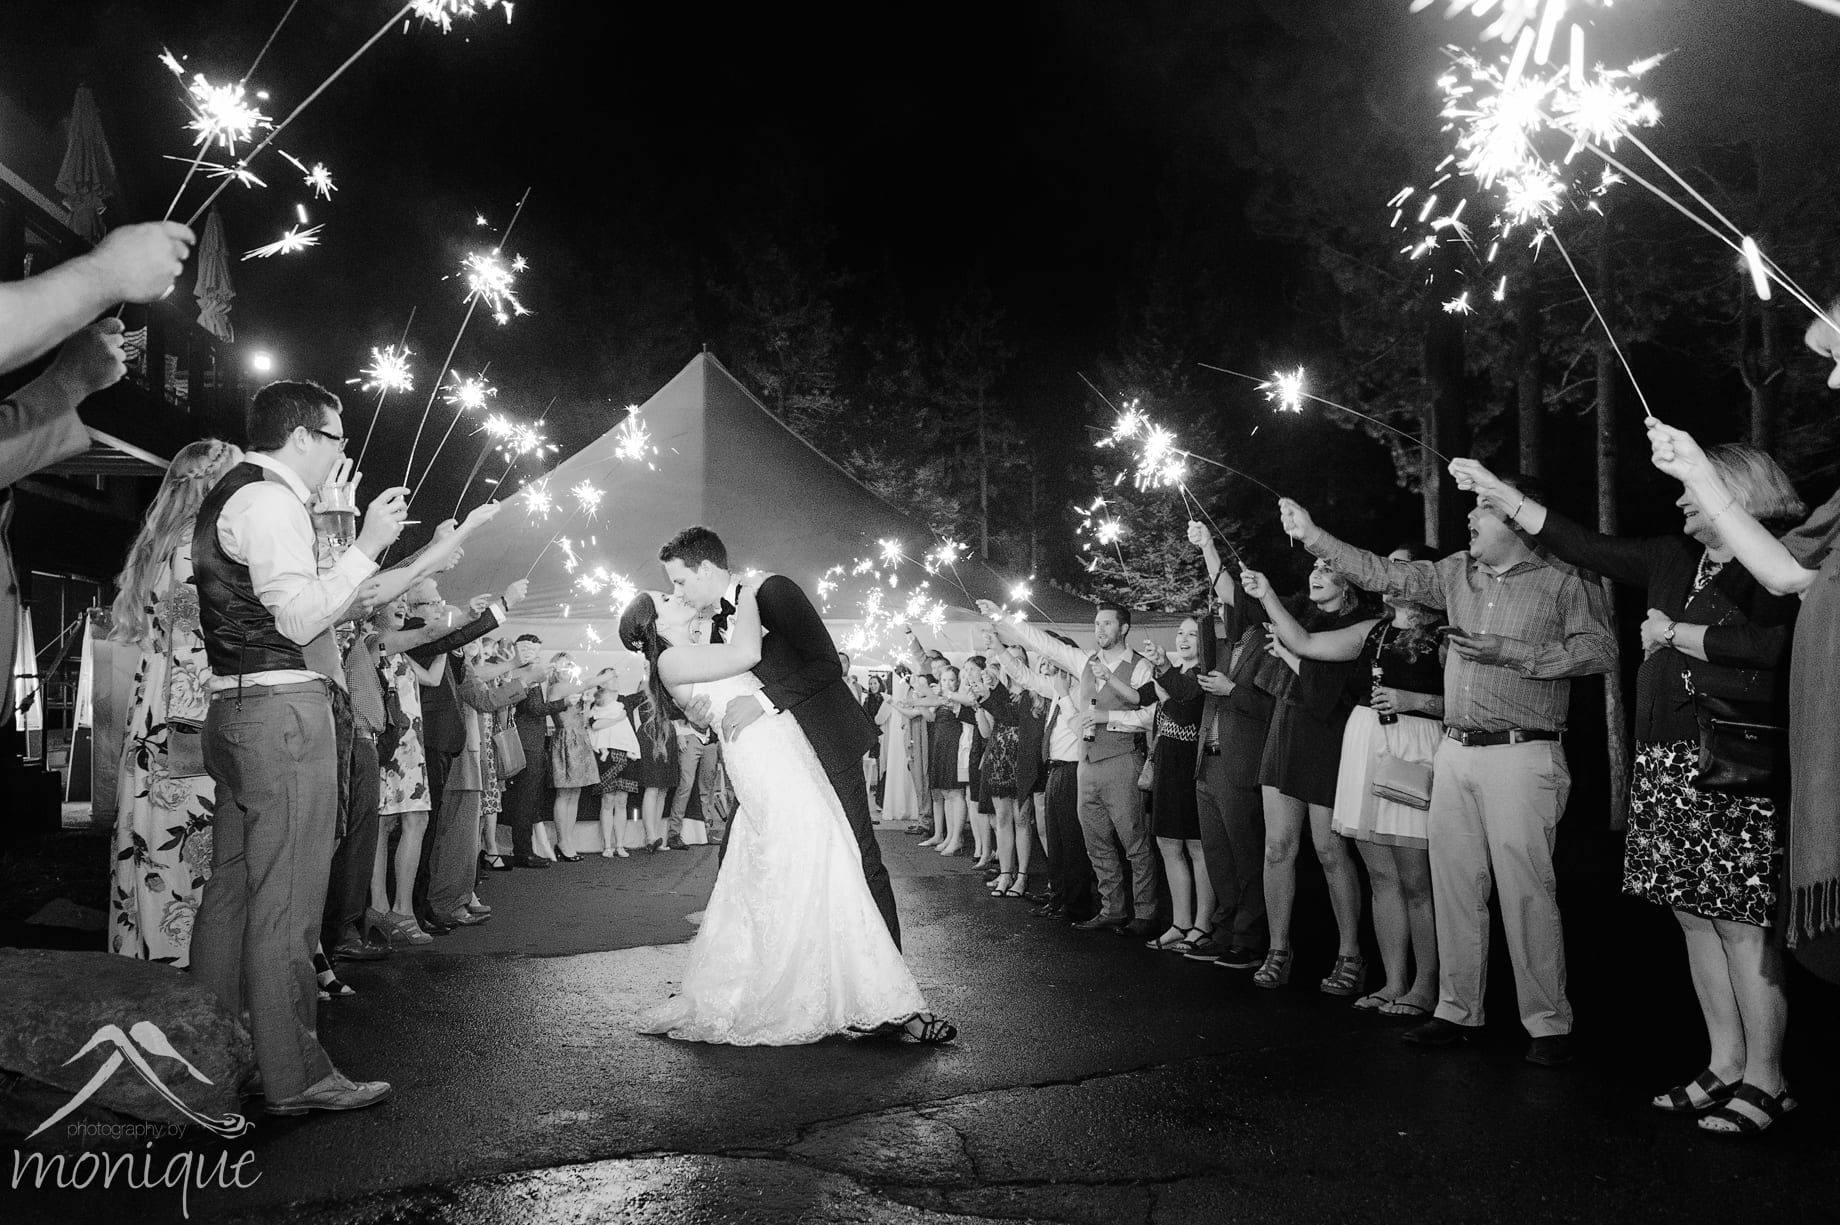 The Lodge at Tahoe Donner wedding photography with a bride and groom kissing during a sparkler exit by Photography by Monique specializing in documentary style wedding photojournalism